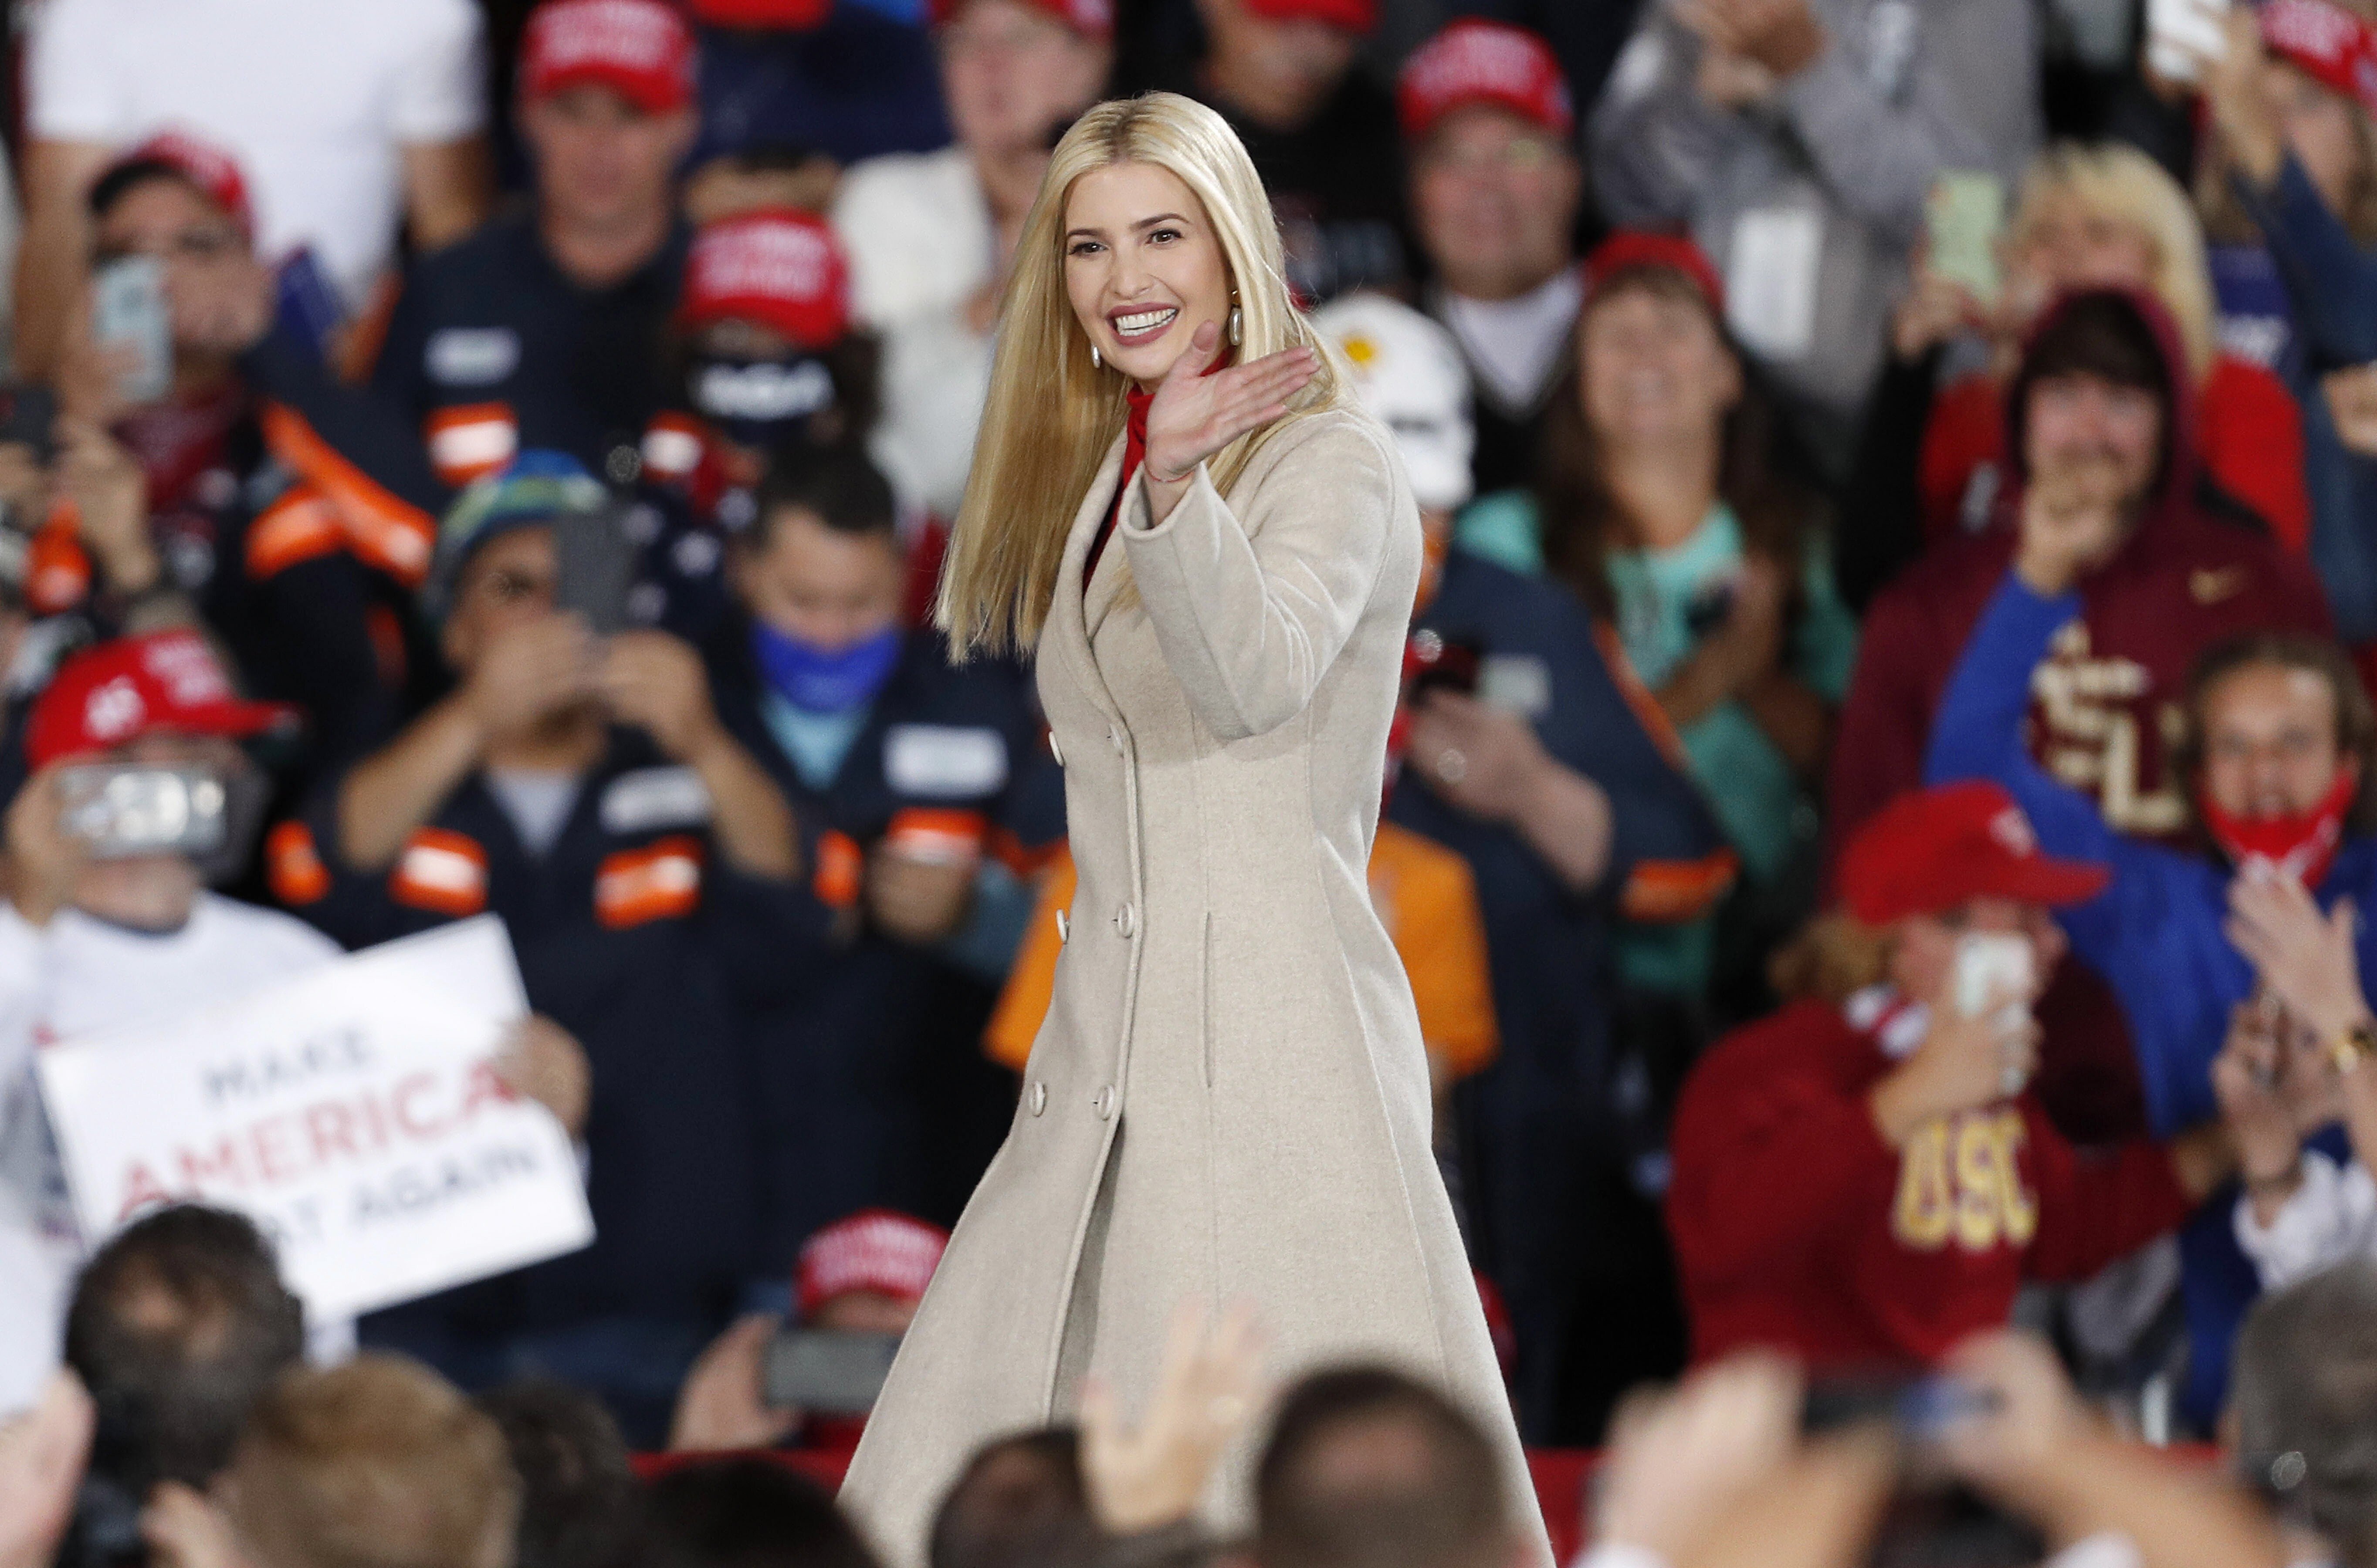 Adviser to the President Ivanka Trump waves during a campaign event in Moon Township, Pennsylvania, on Tuesday. Photo: EPA-EFE